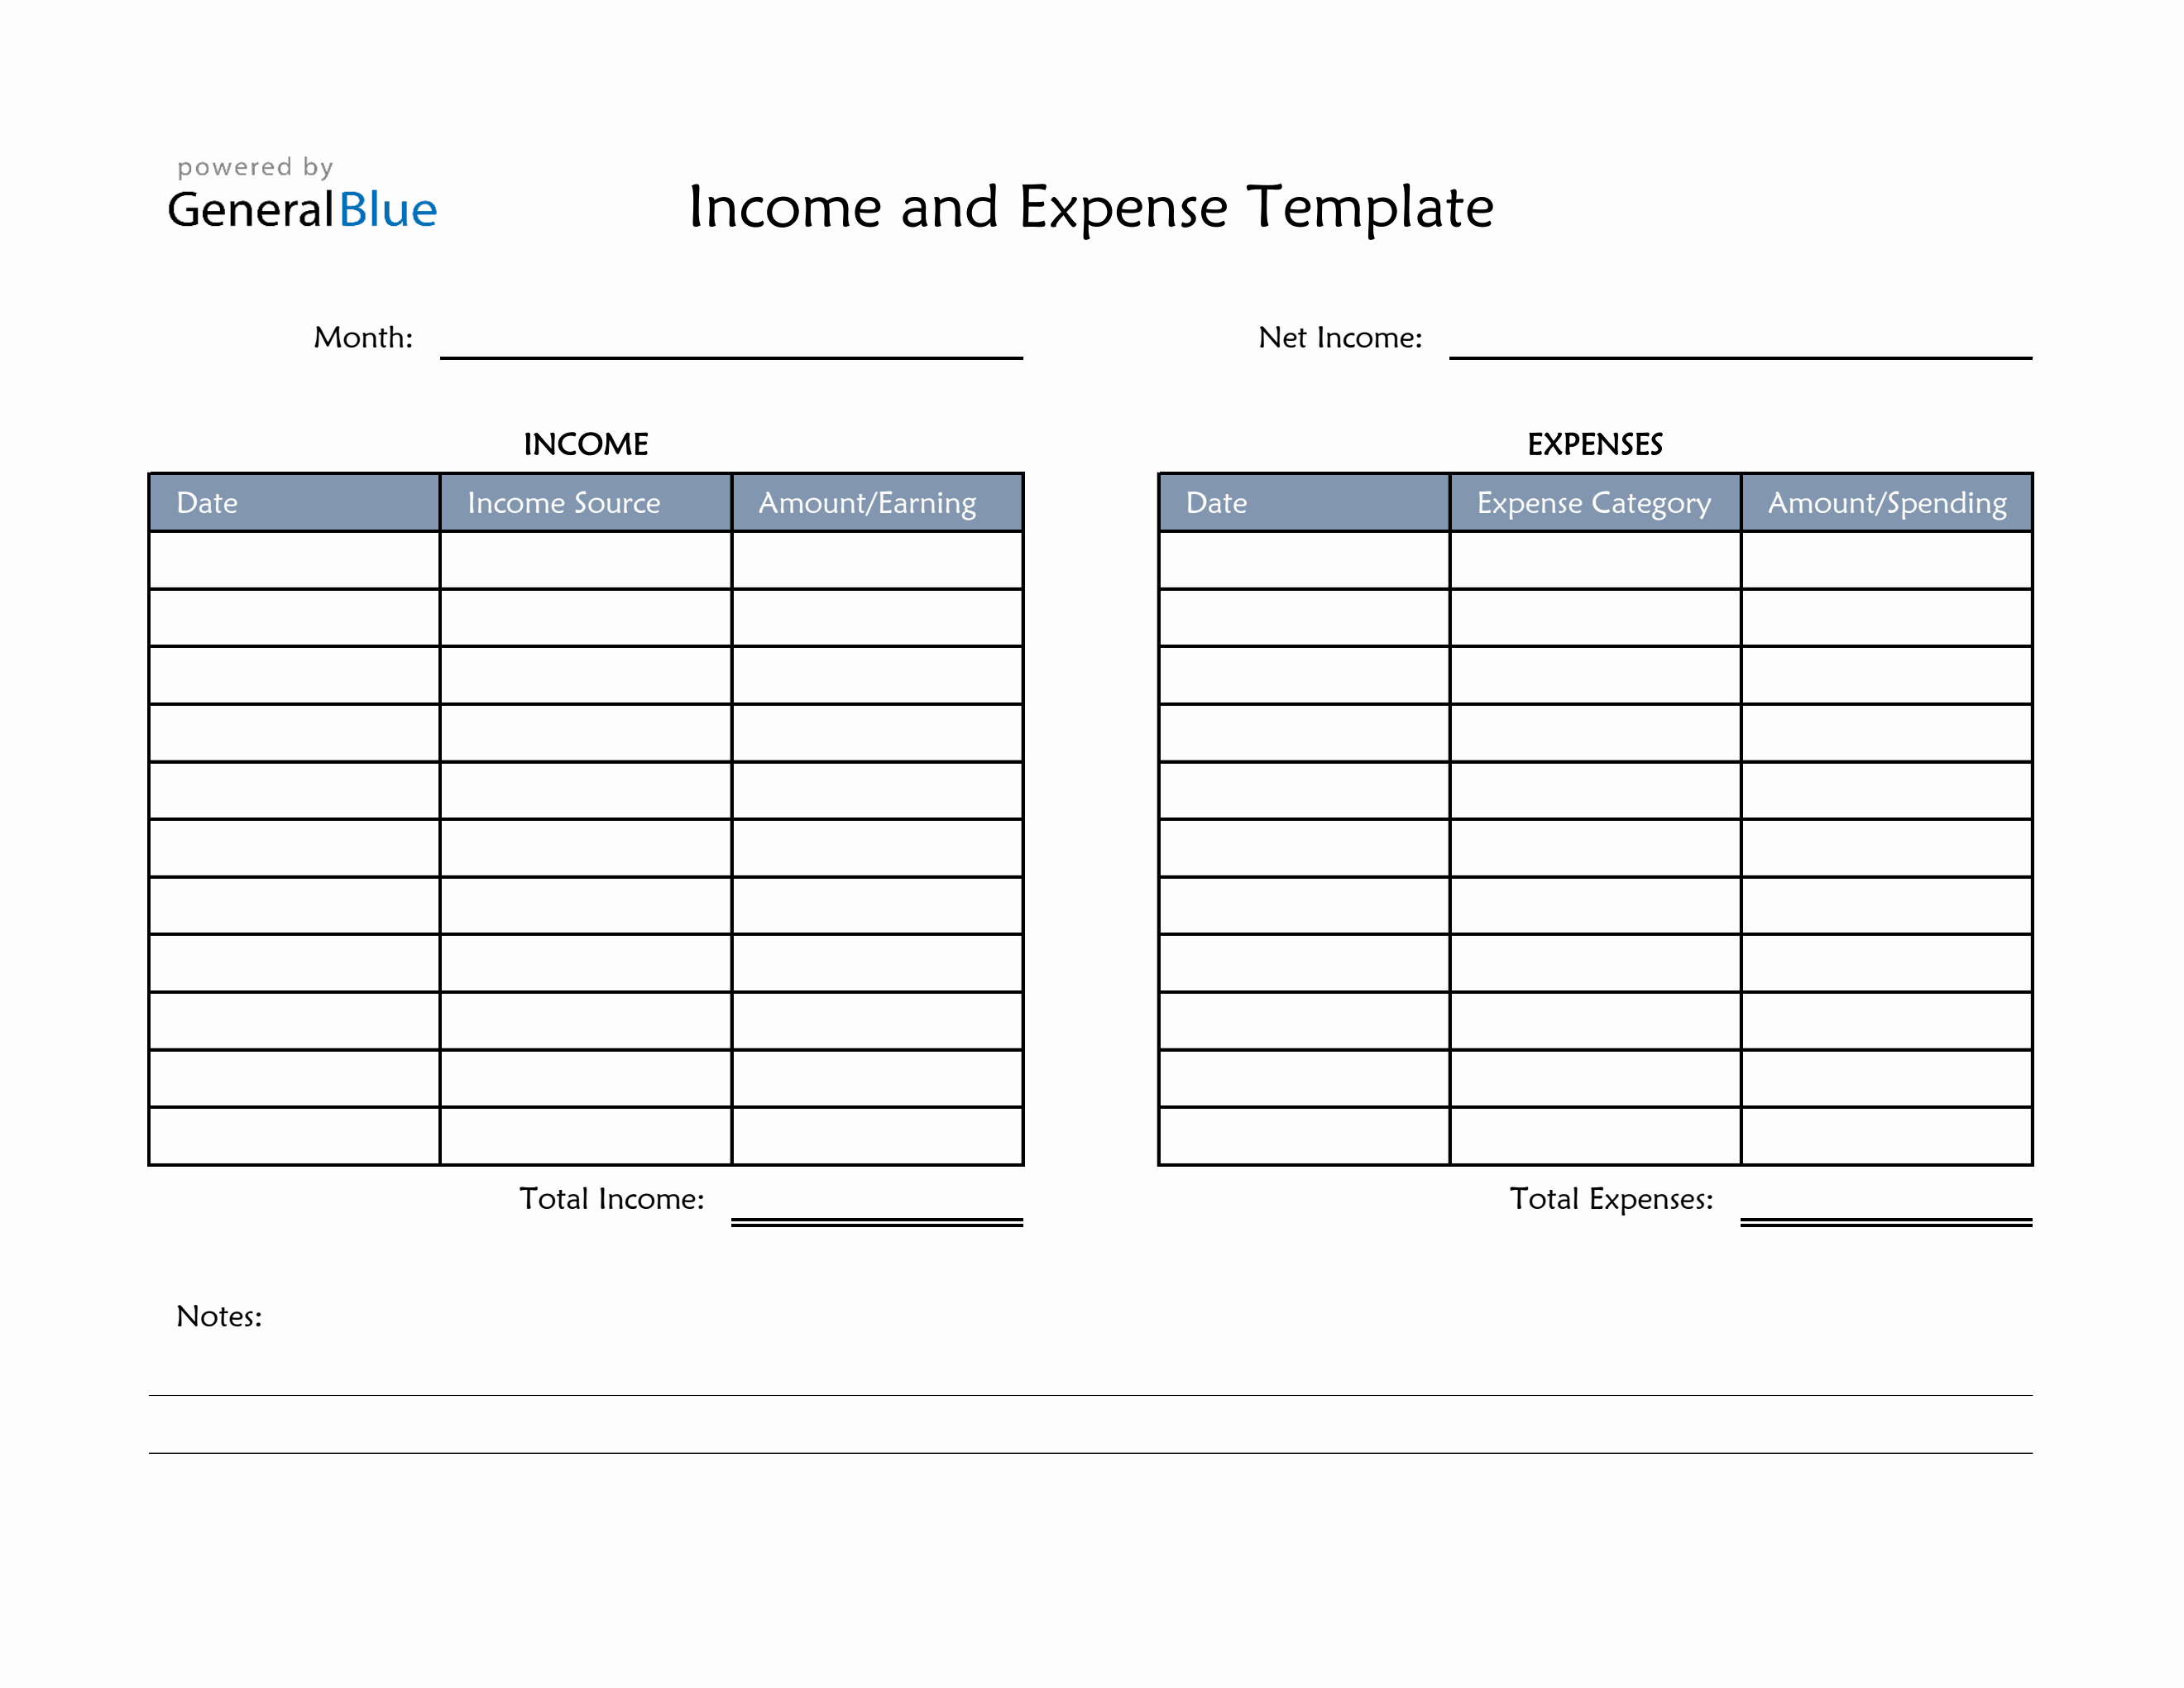 Simple and Expense Template in Excel